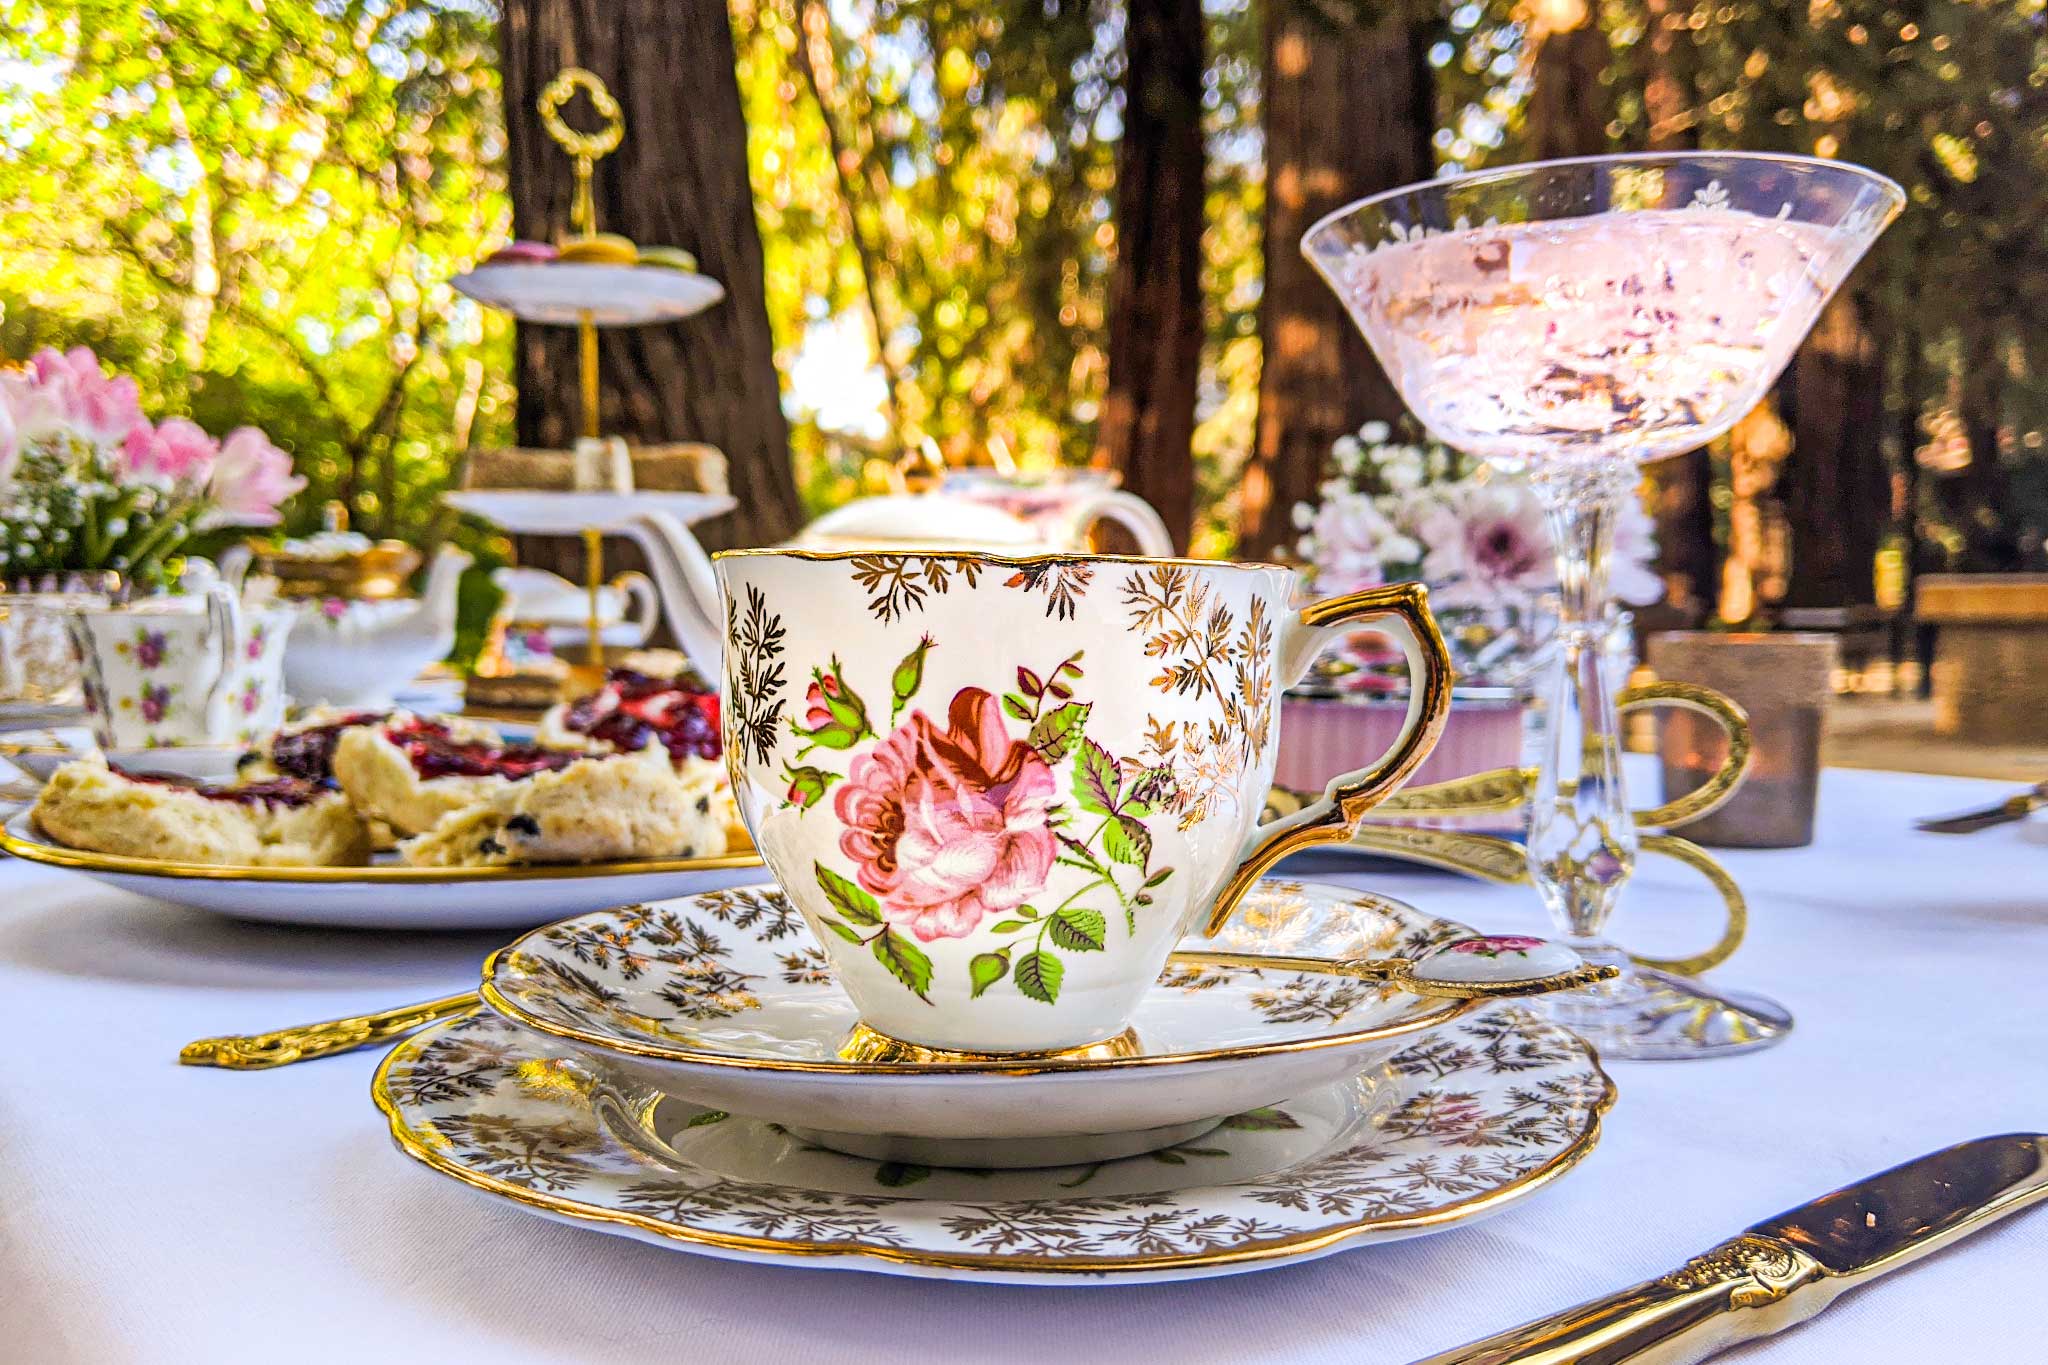 Enjoy a Tea Party in the comfort of your own Home